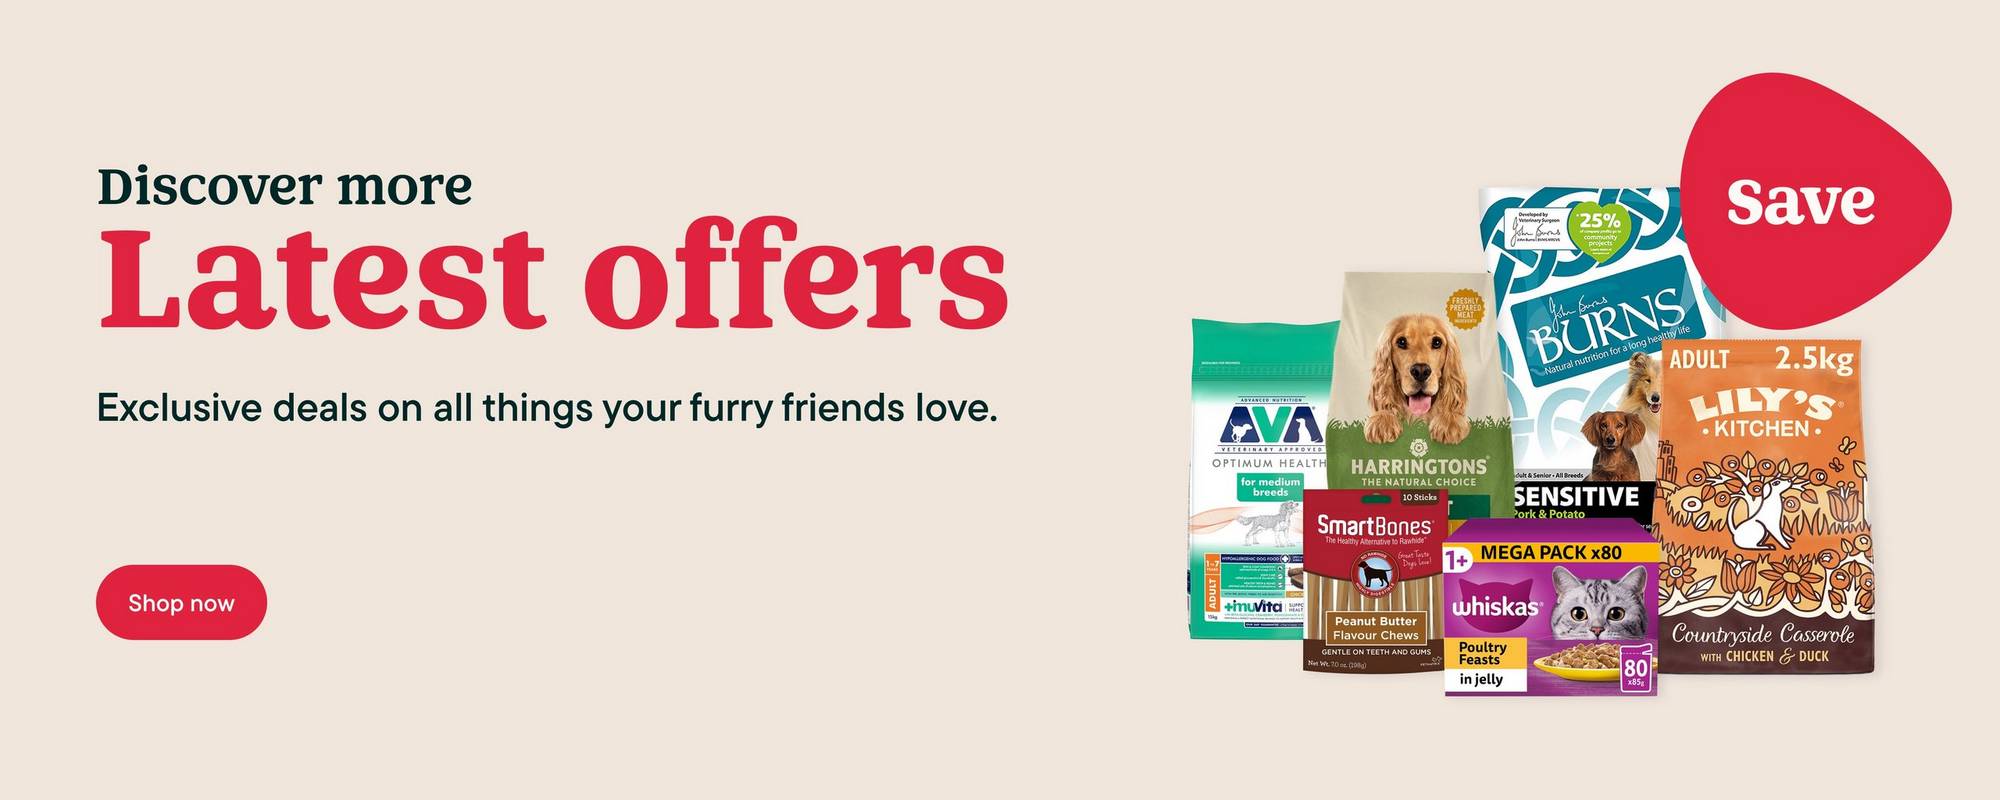 Latest offers - treat your pet for less